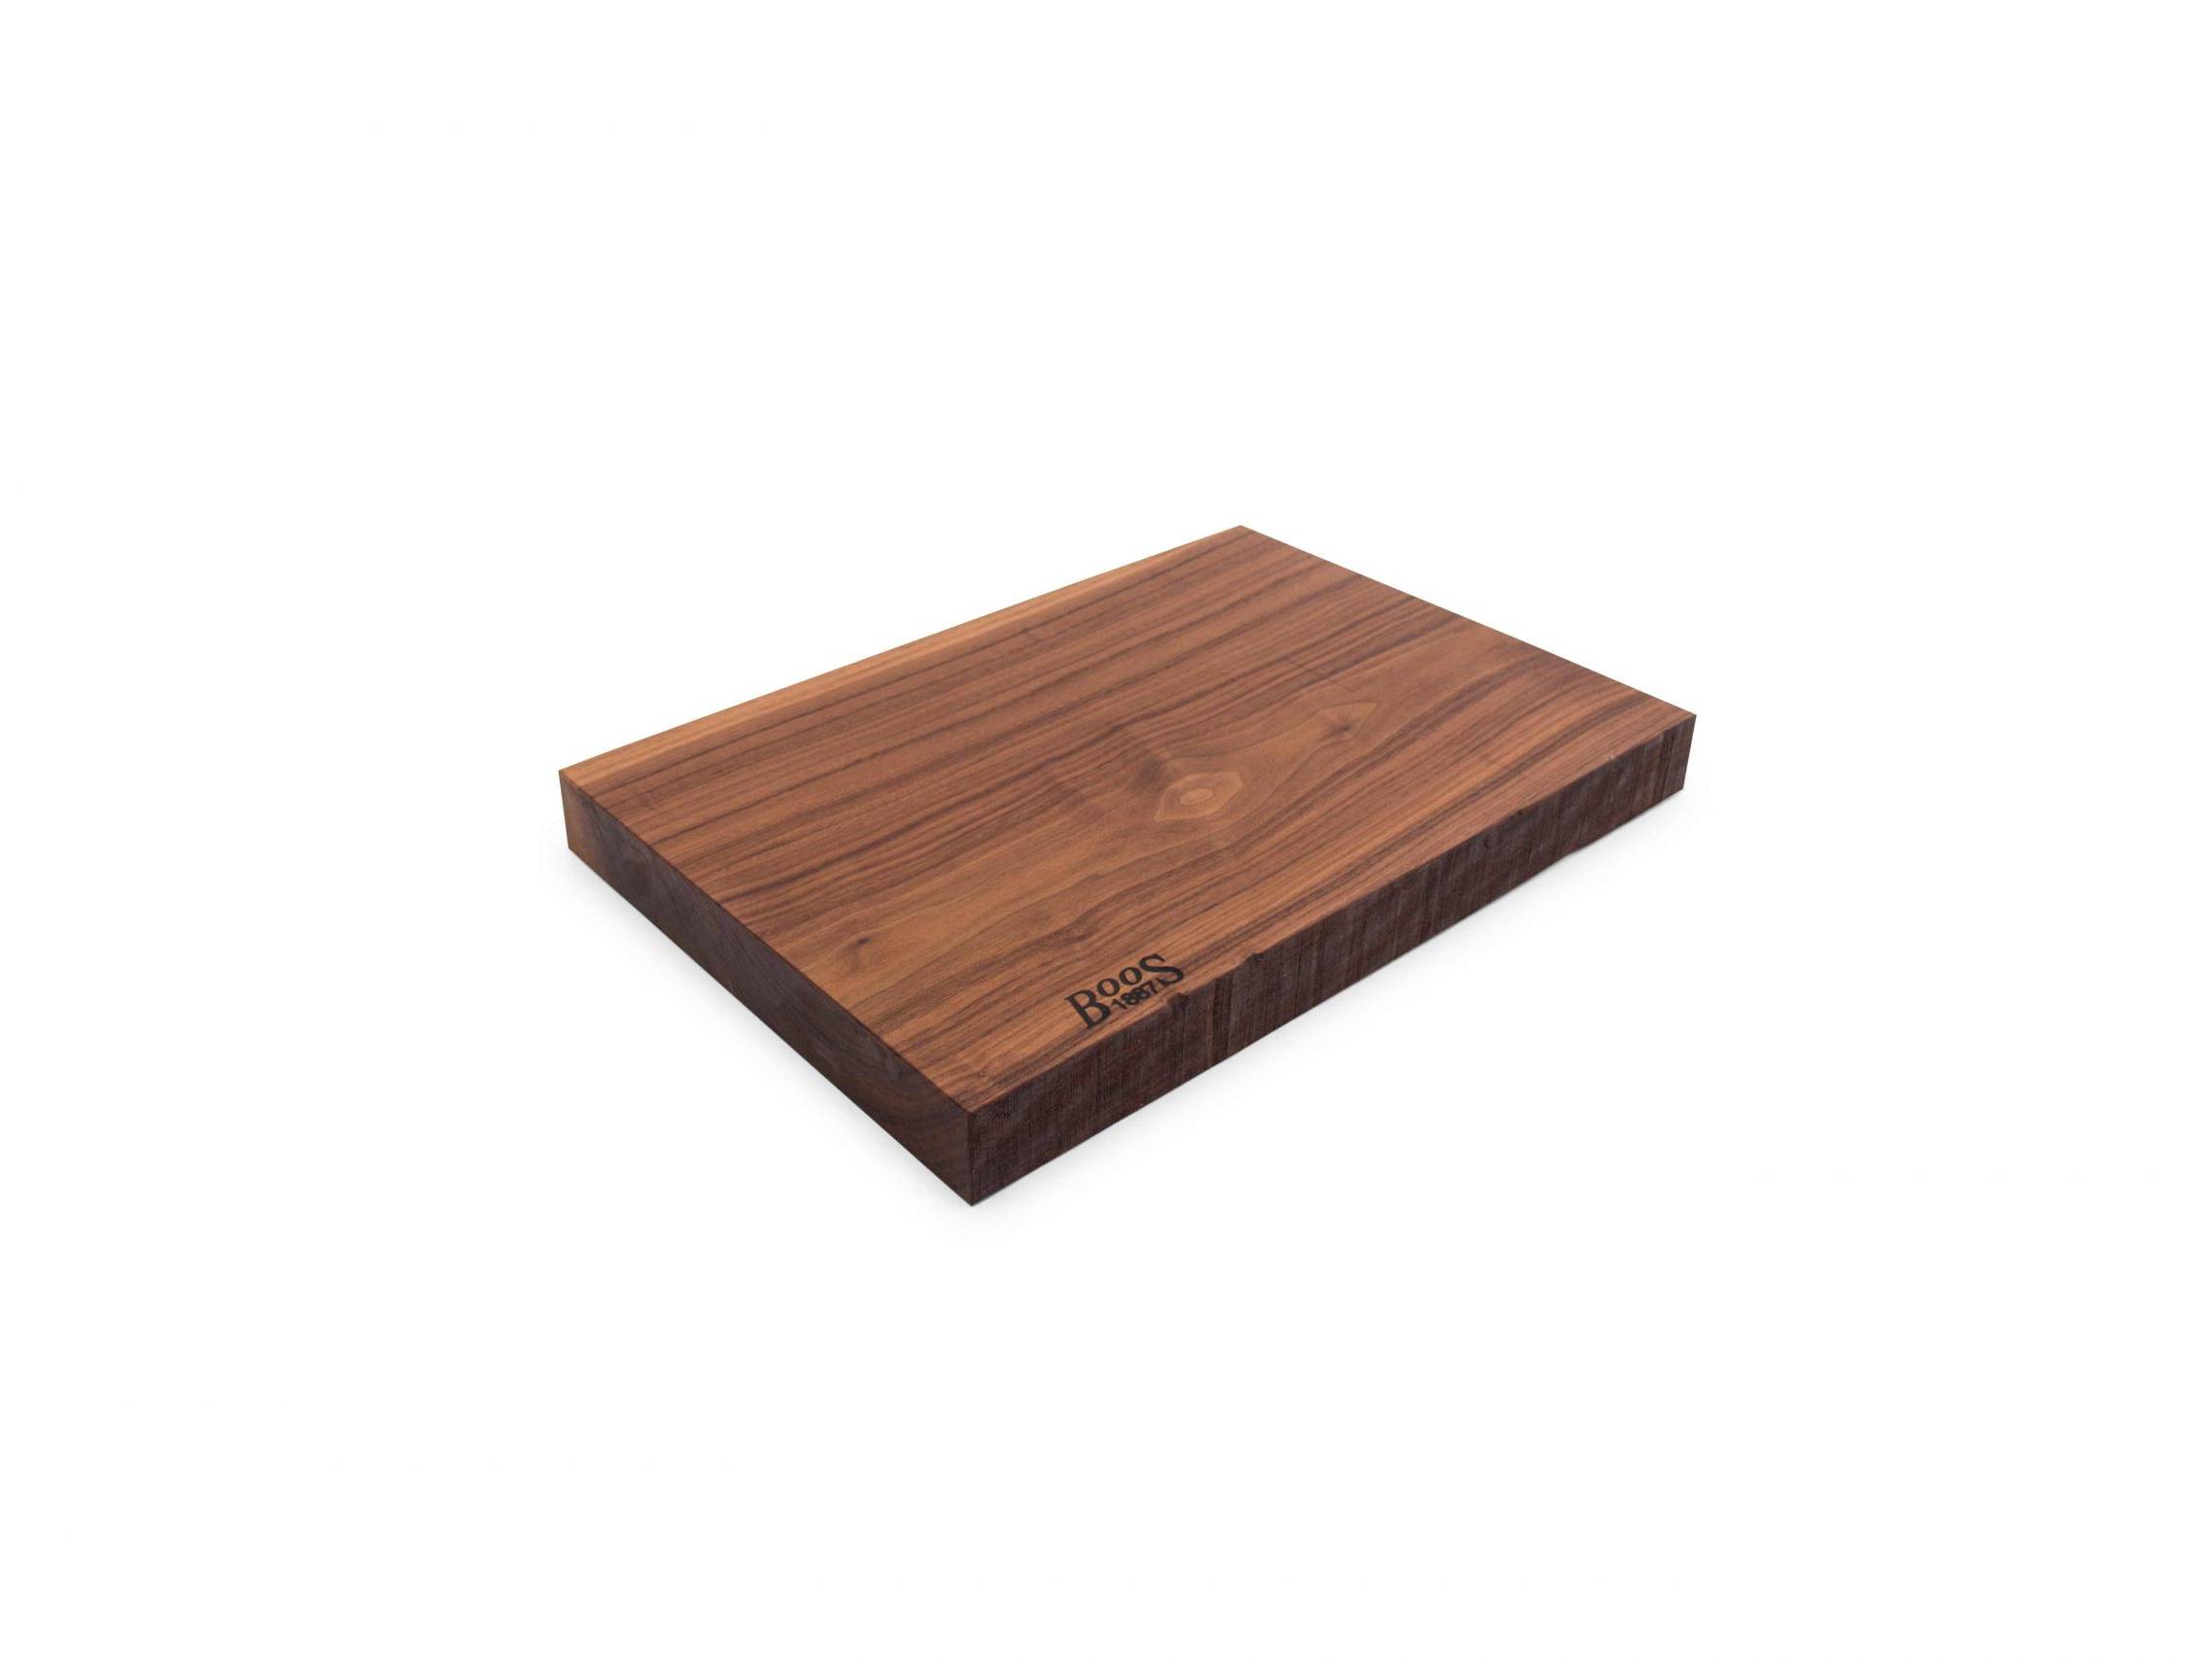 Boos 1887 / Rustic Edge one piece cutting board; Black Walnut; can be used on both sides 7